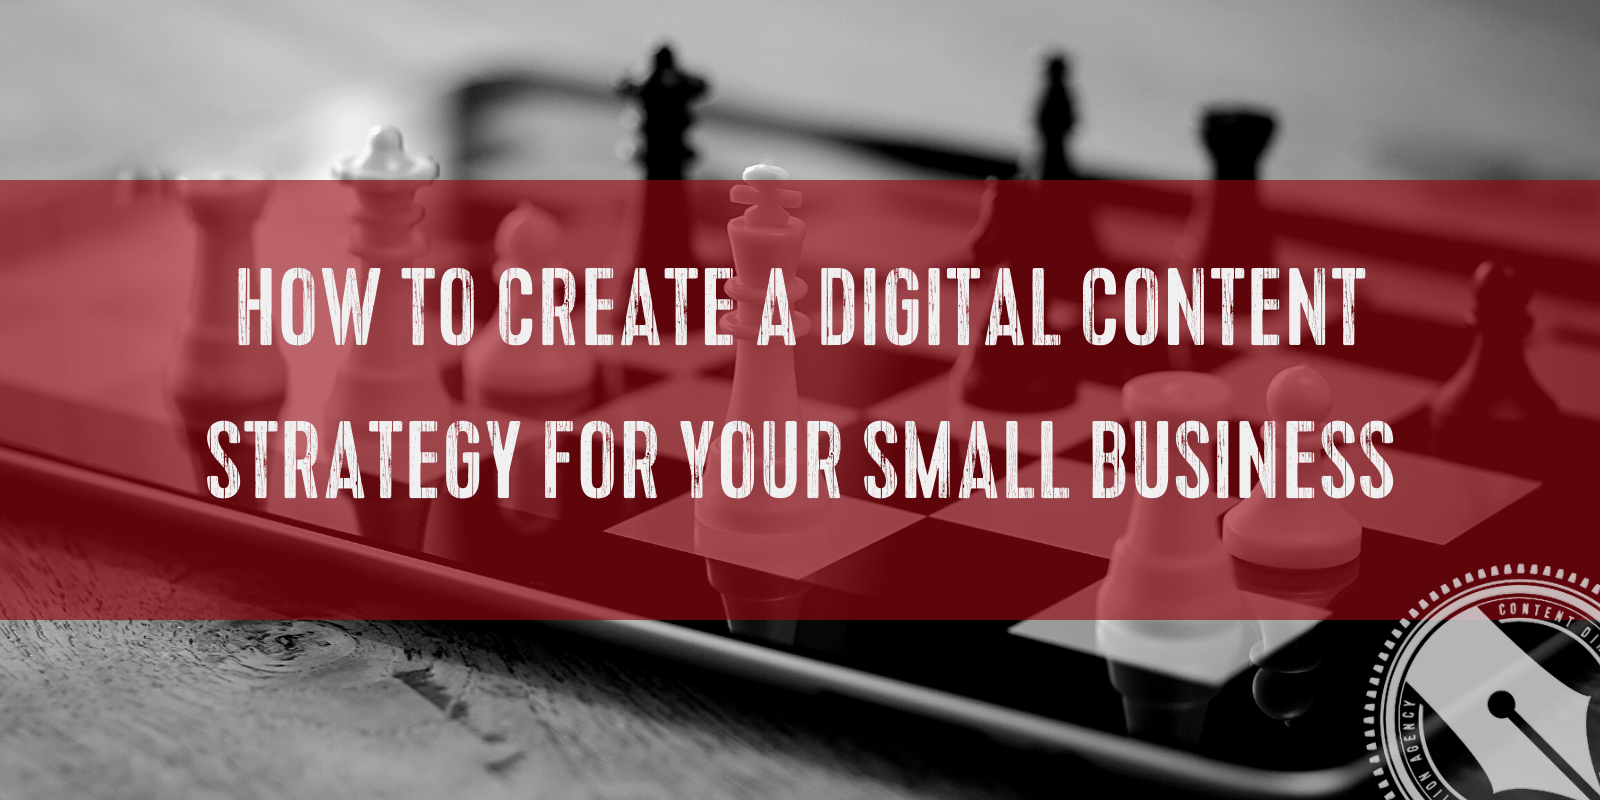 Image reads "How to Create a Digital Content Strategy For Your Small Business" on a red banner over a black and white image of chess pieces on a digital chessboard.